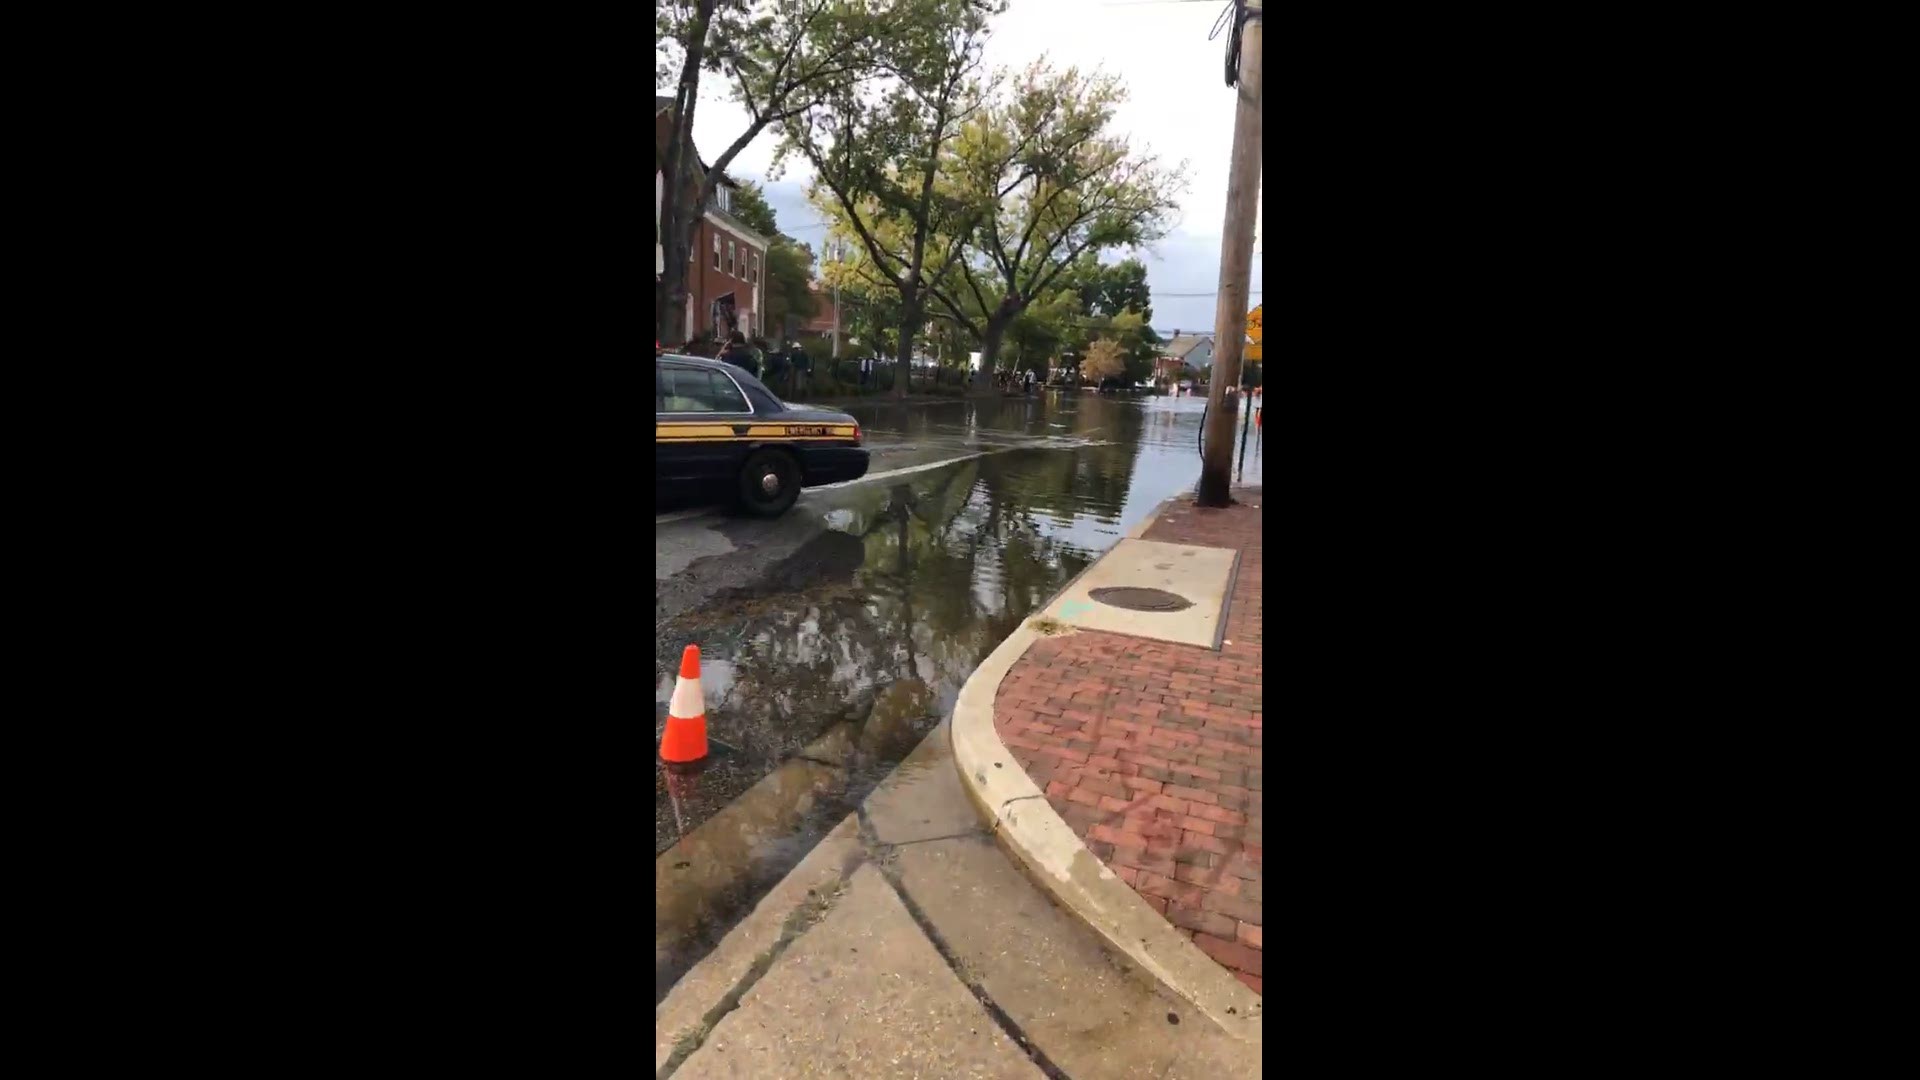 Tidal flooding in Annapolis, Maryland during the annual Annapolis Boat Show.